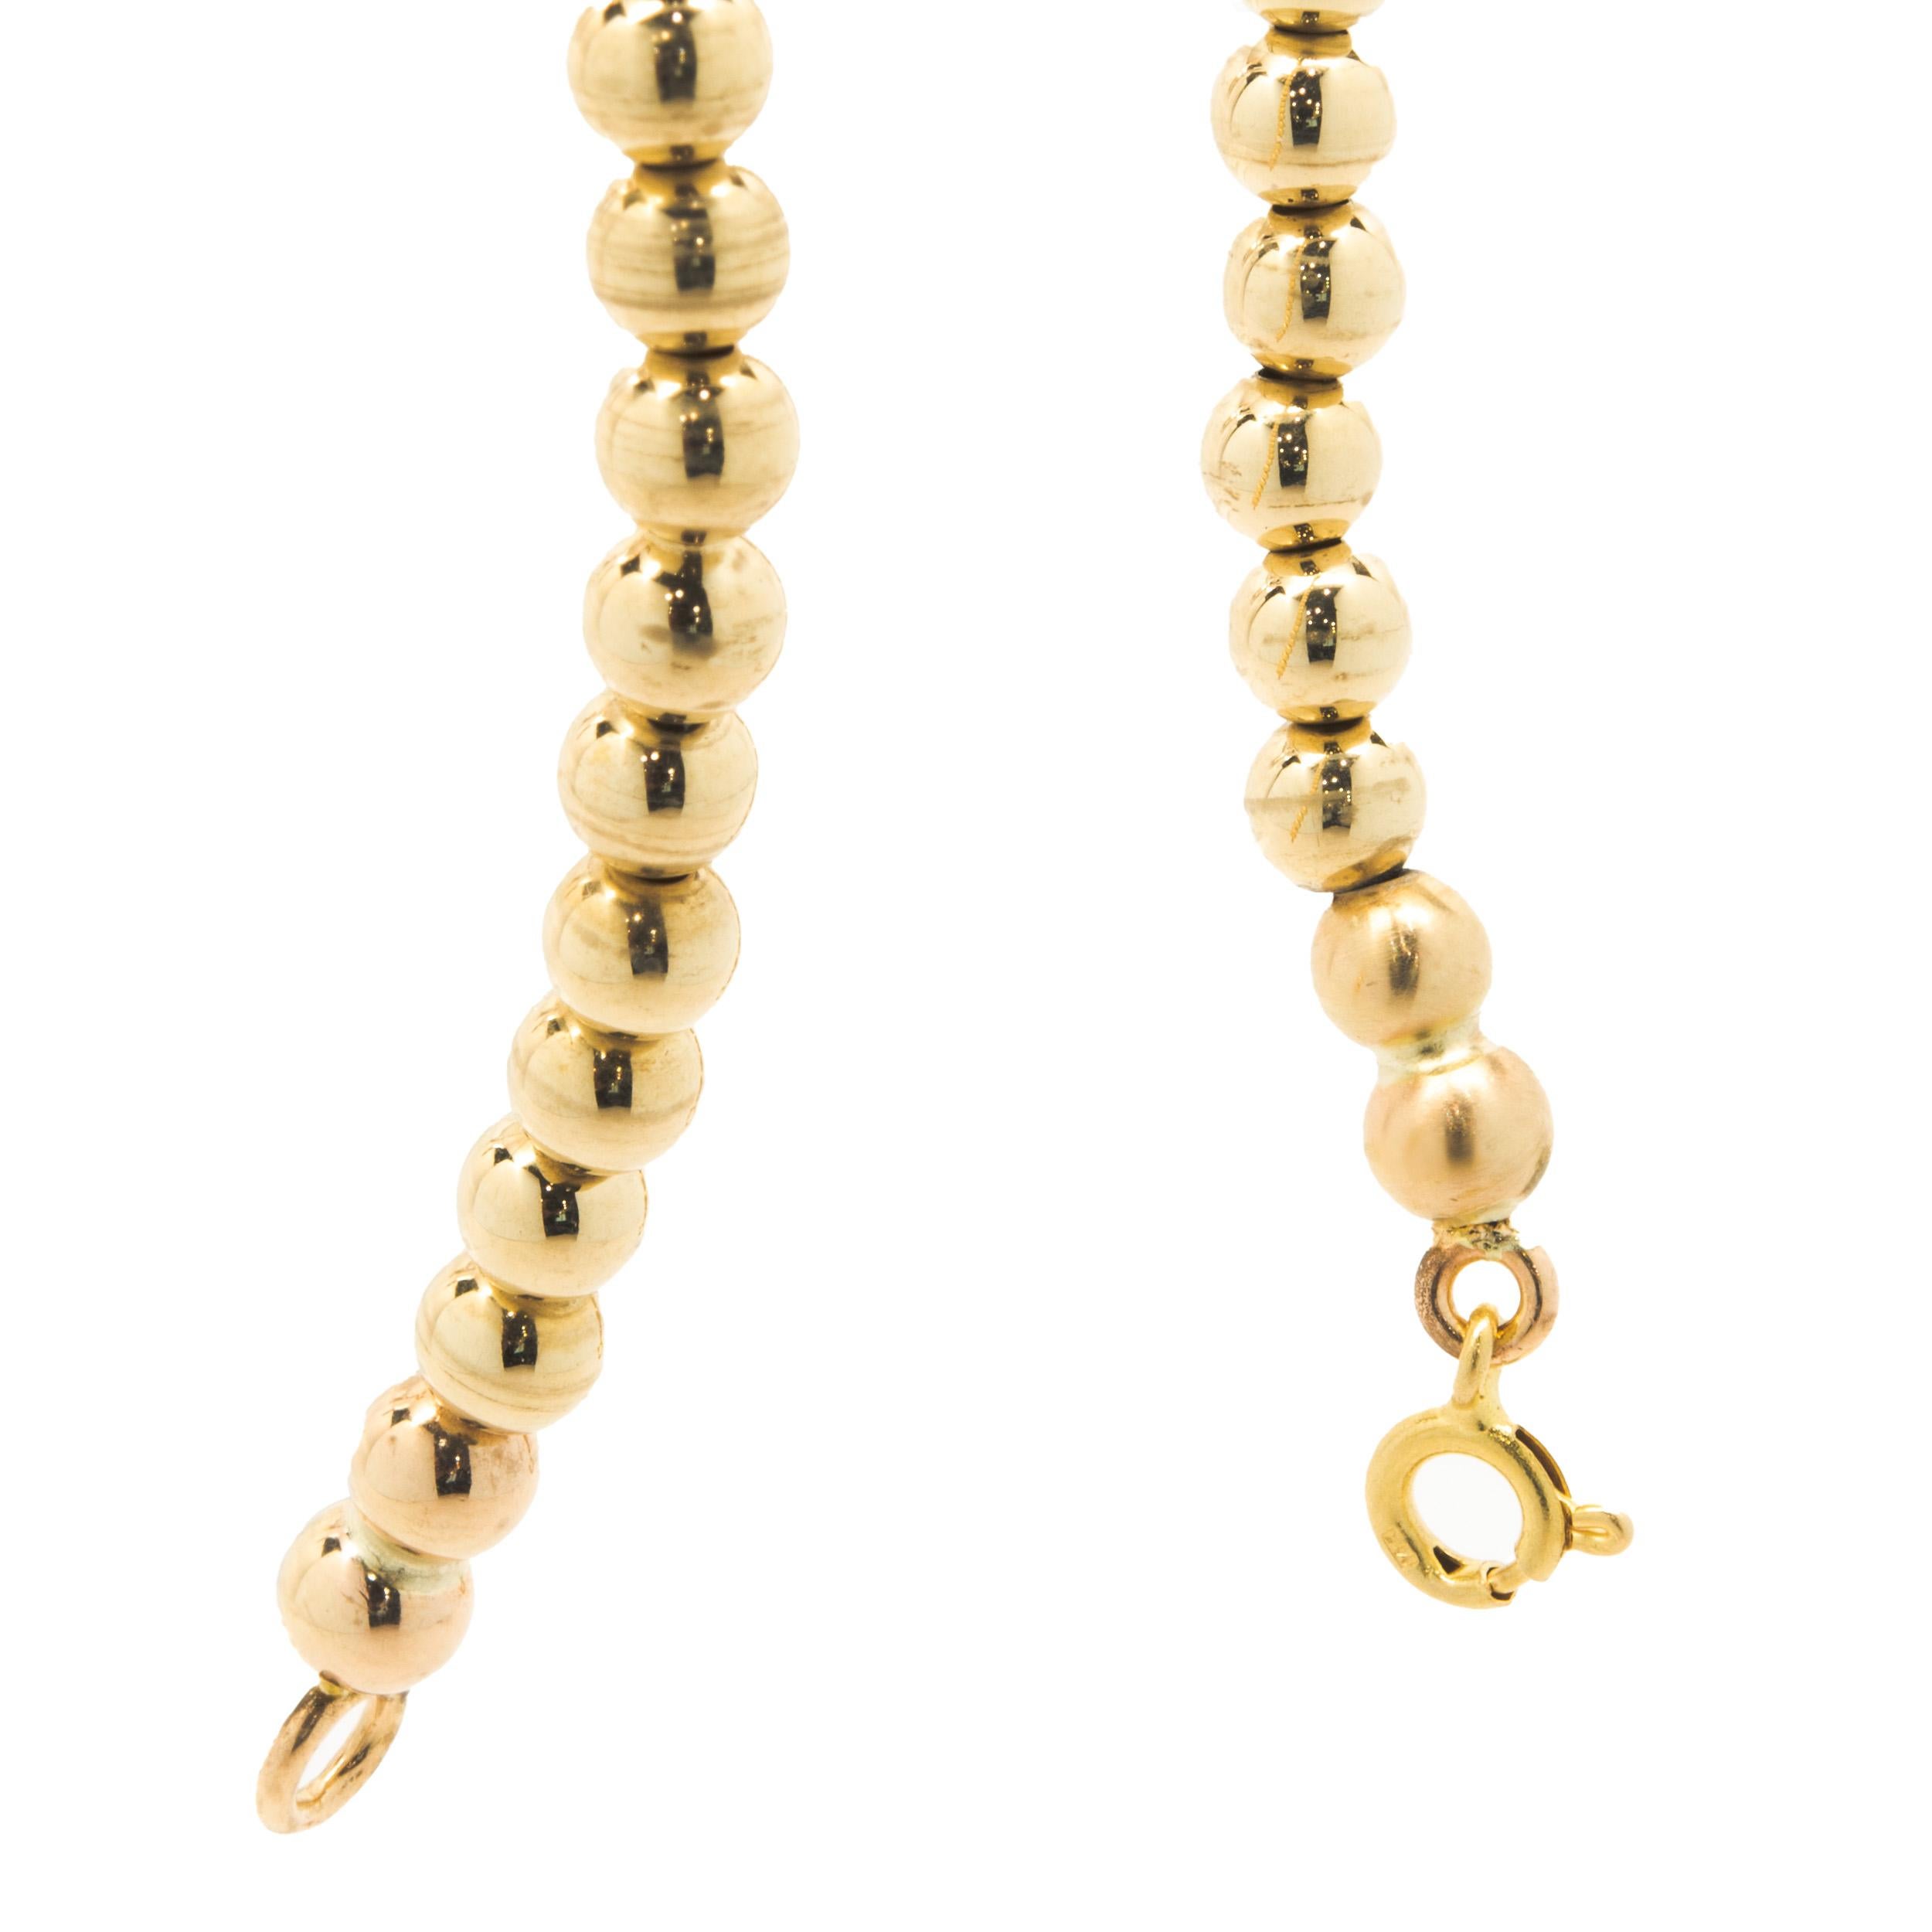 Material: 14K yellow gold
Dimensions: bracelet will fit up to an 6.5-inch wrist
Weight: 5.81 grams
